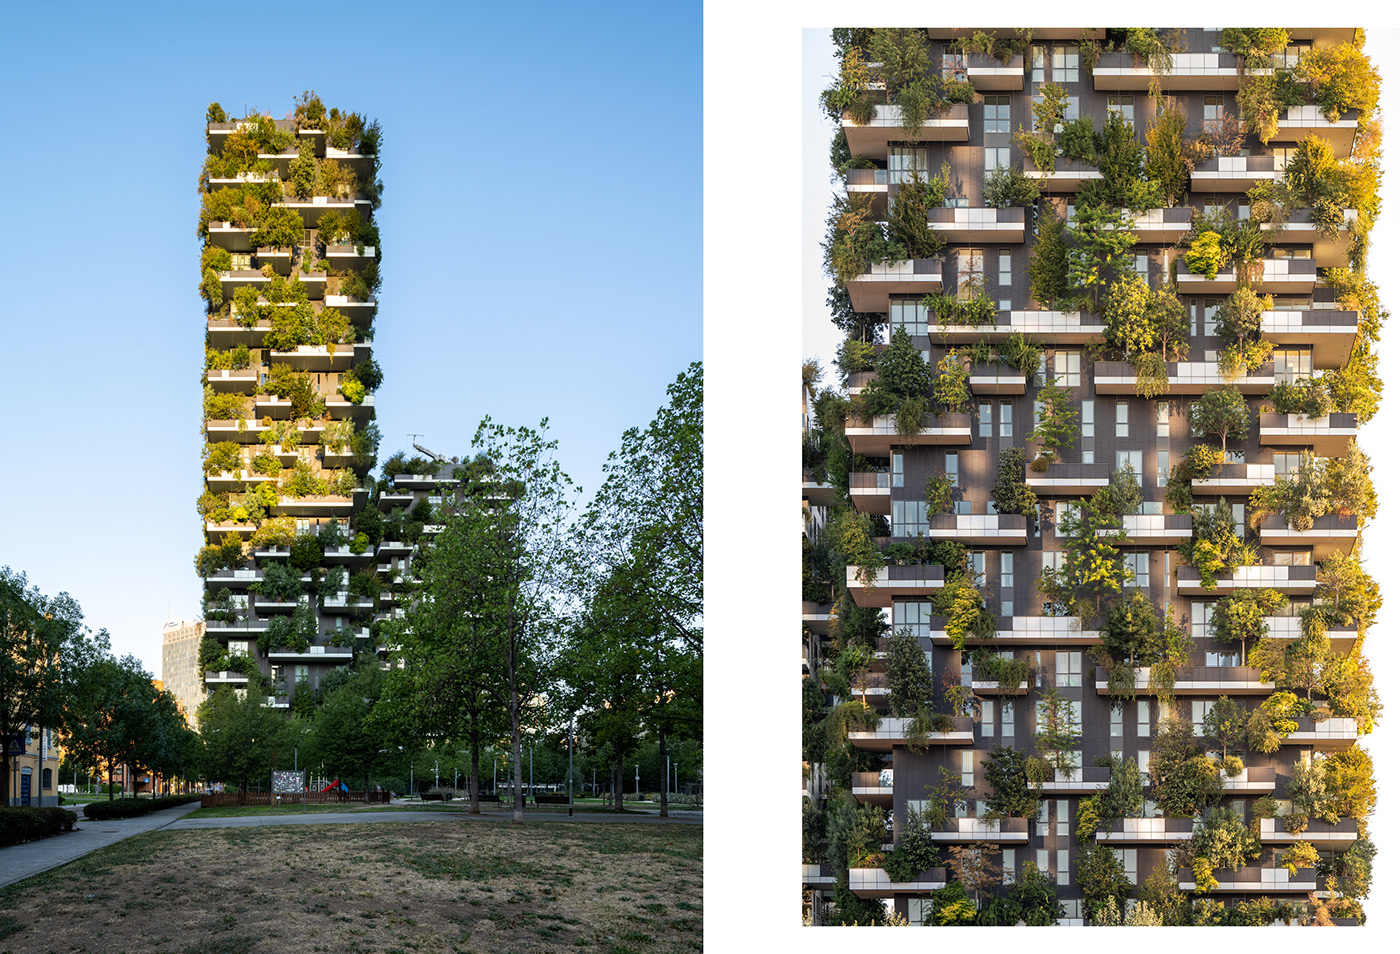 architecture milano Italy Photography  photographer lightroom photoshoot boscoverticale modernarchitecture verticalforest